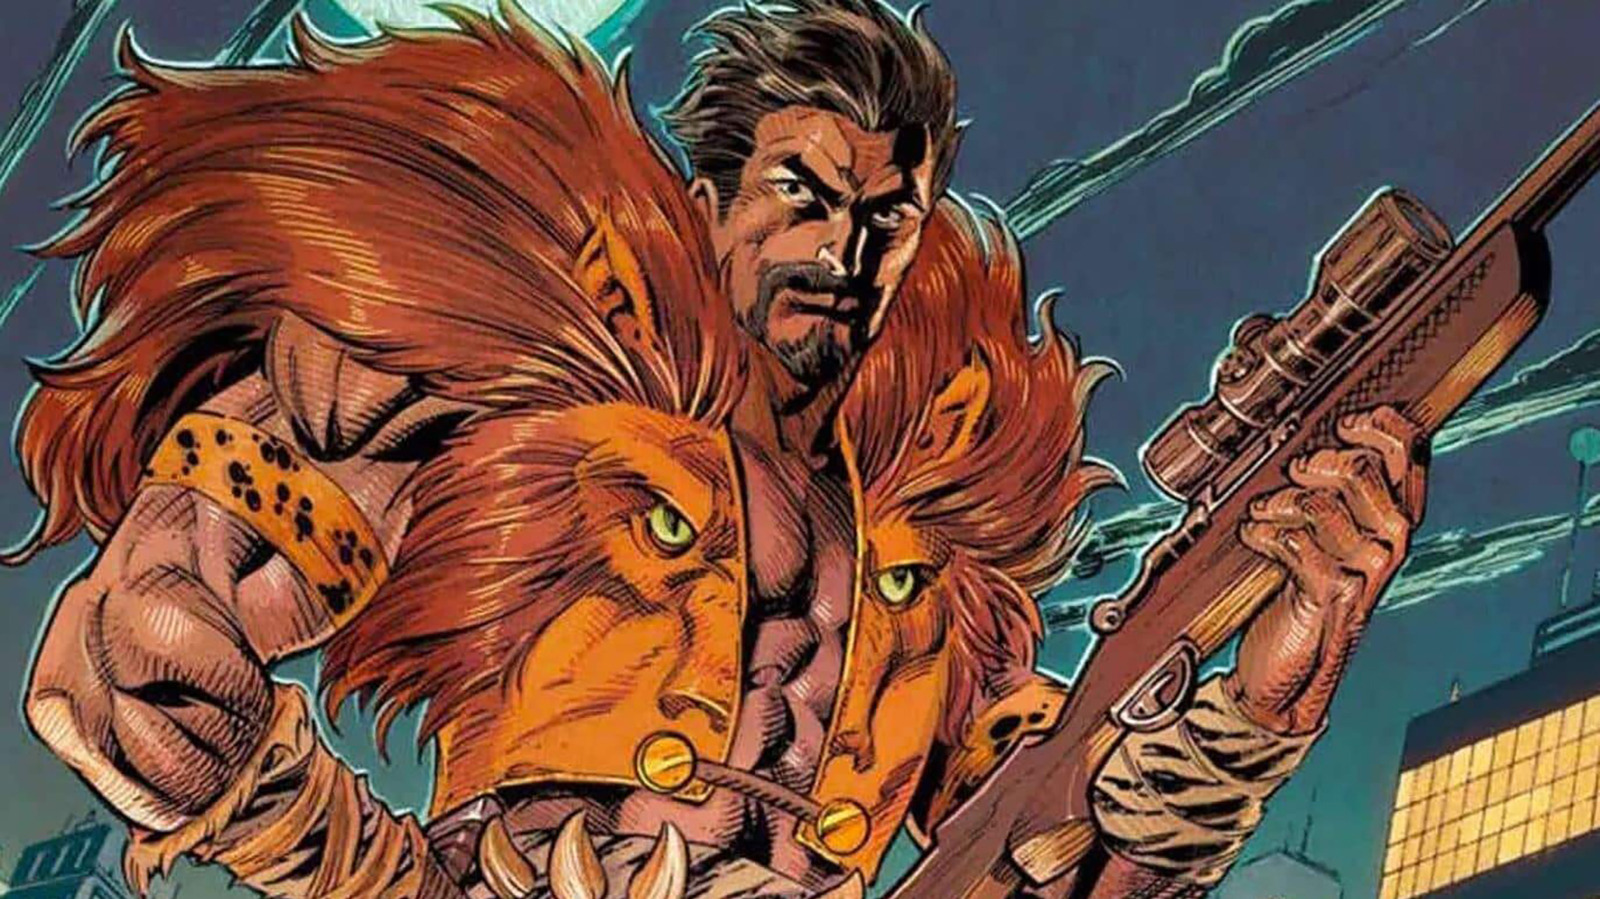 Kraven The Hunter Footage Reaction The Latest Spider Man Spin Off Goes For The R Rating